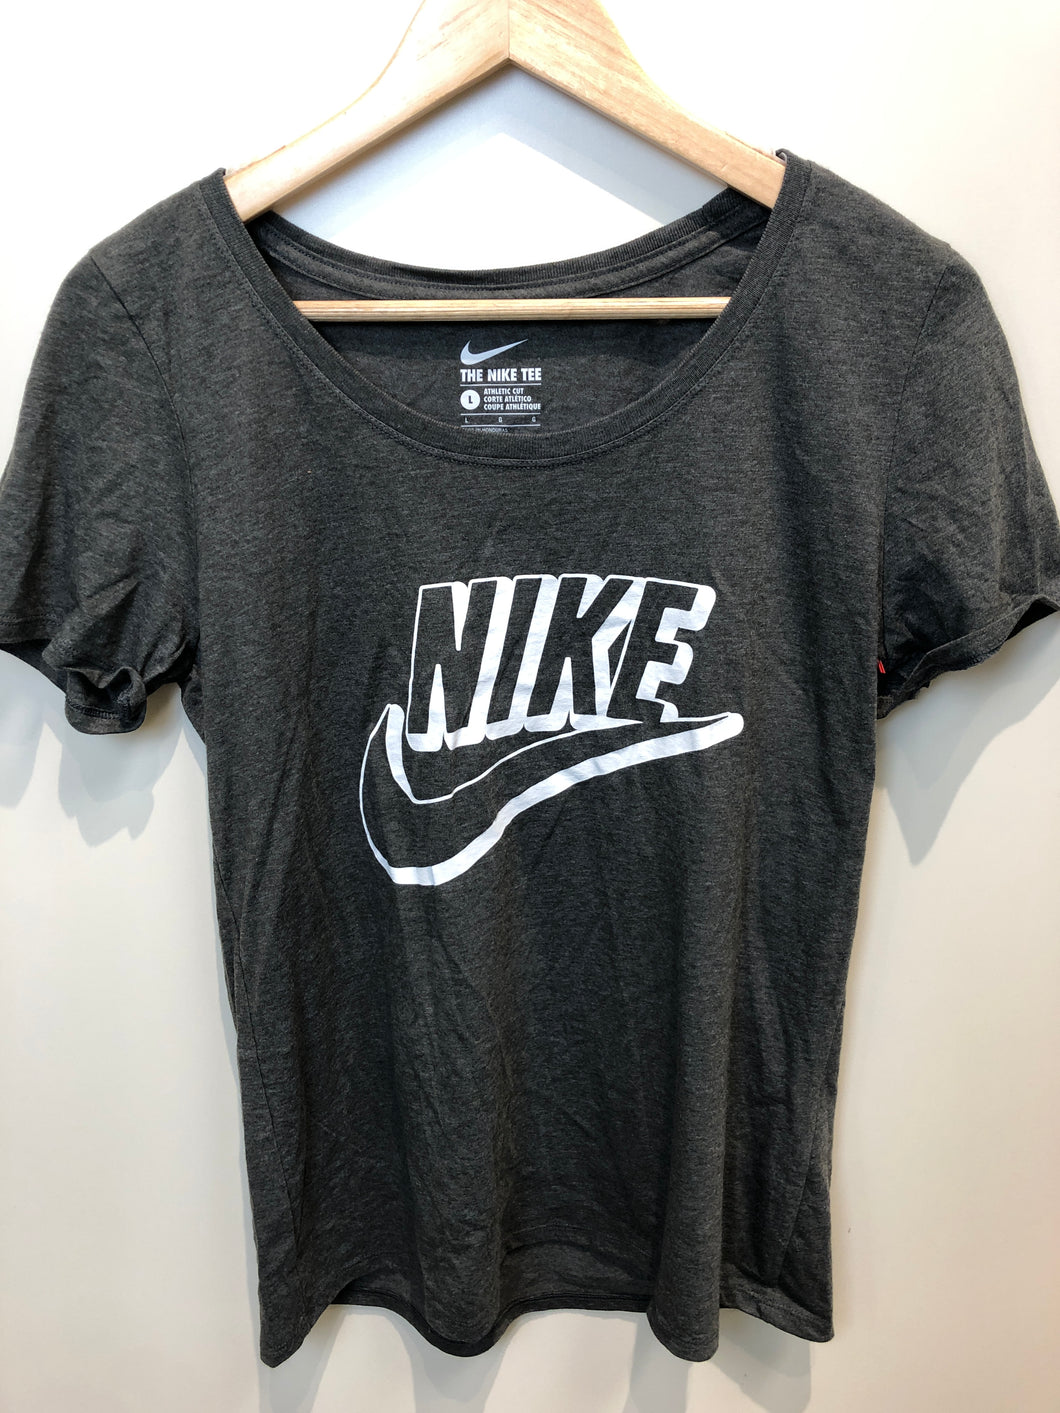 Nike Athletic Top Size Large